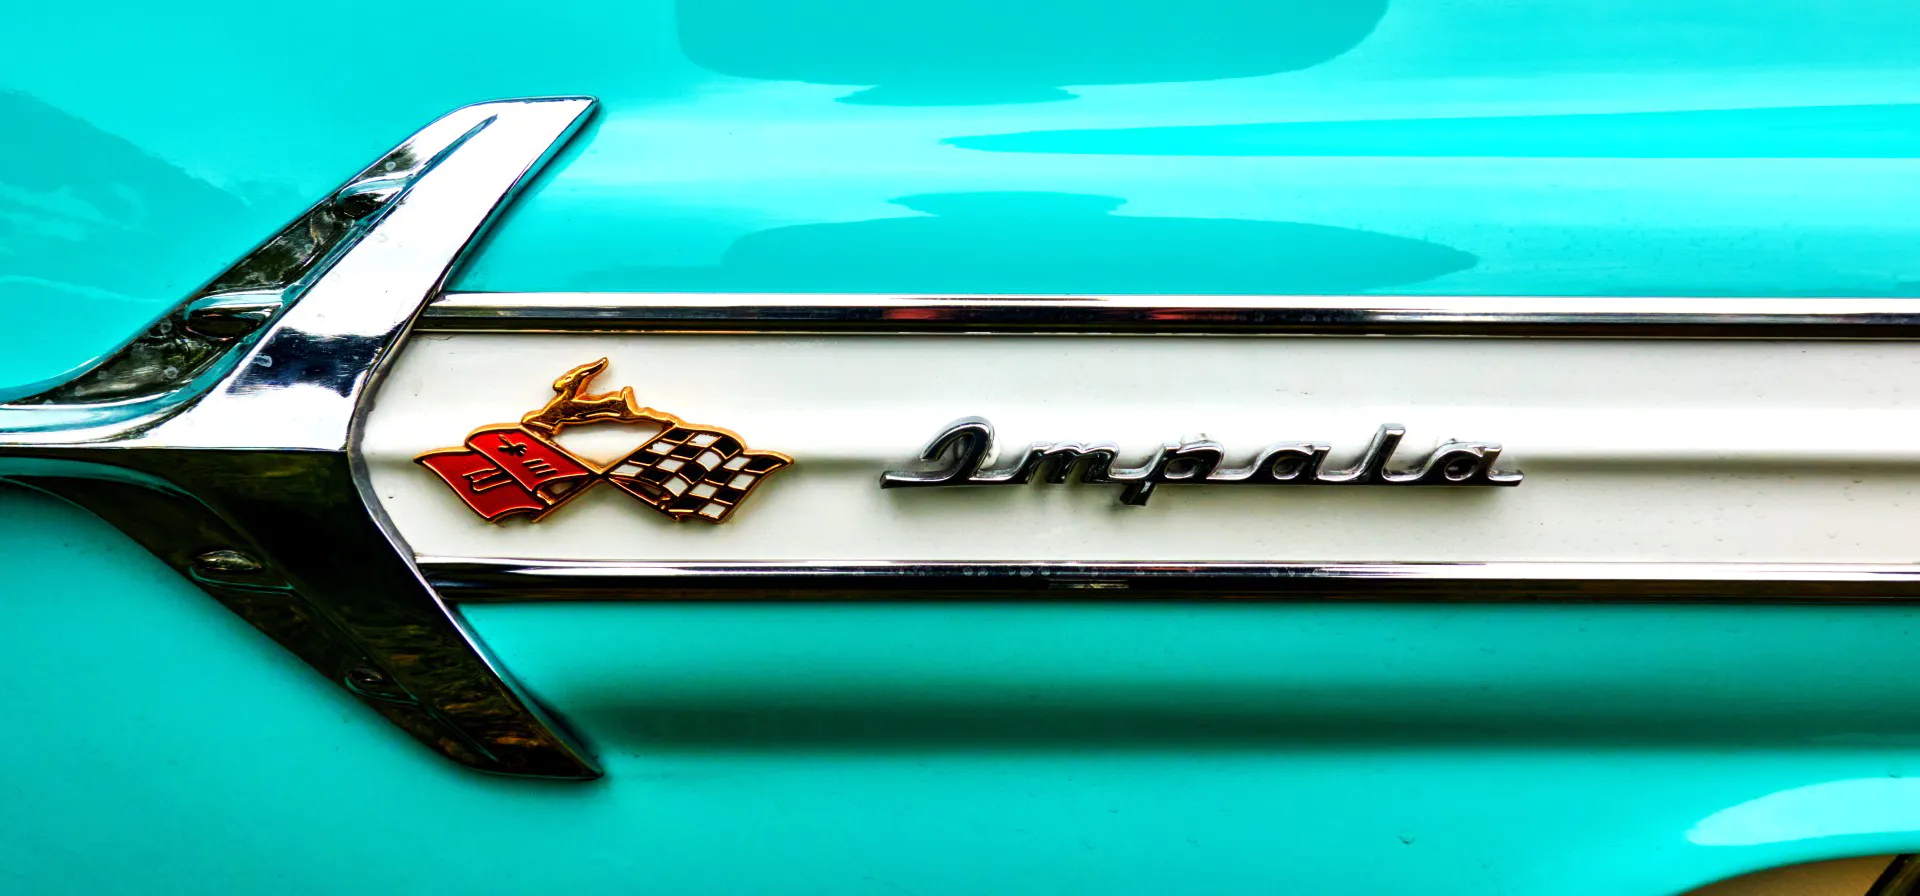 Impala lettering and logo with an antelope, two flags and an arrow on the side a Chevrolet in Lehnin, Germany, September 12, 2021.